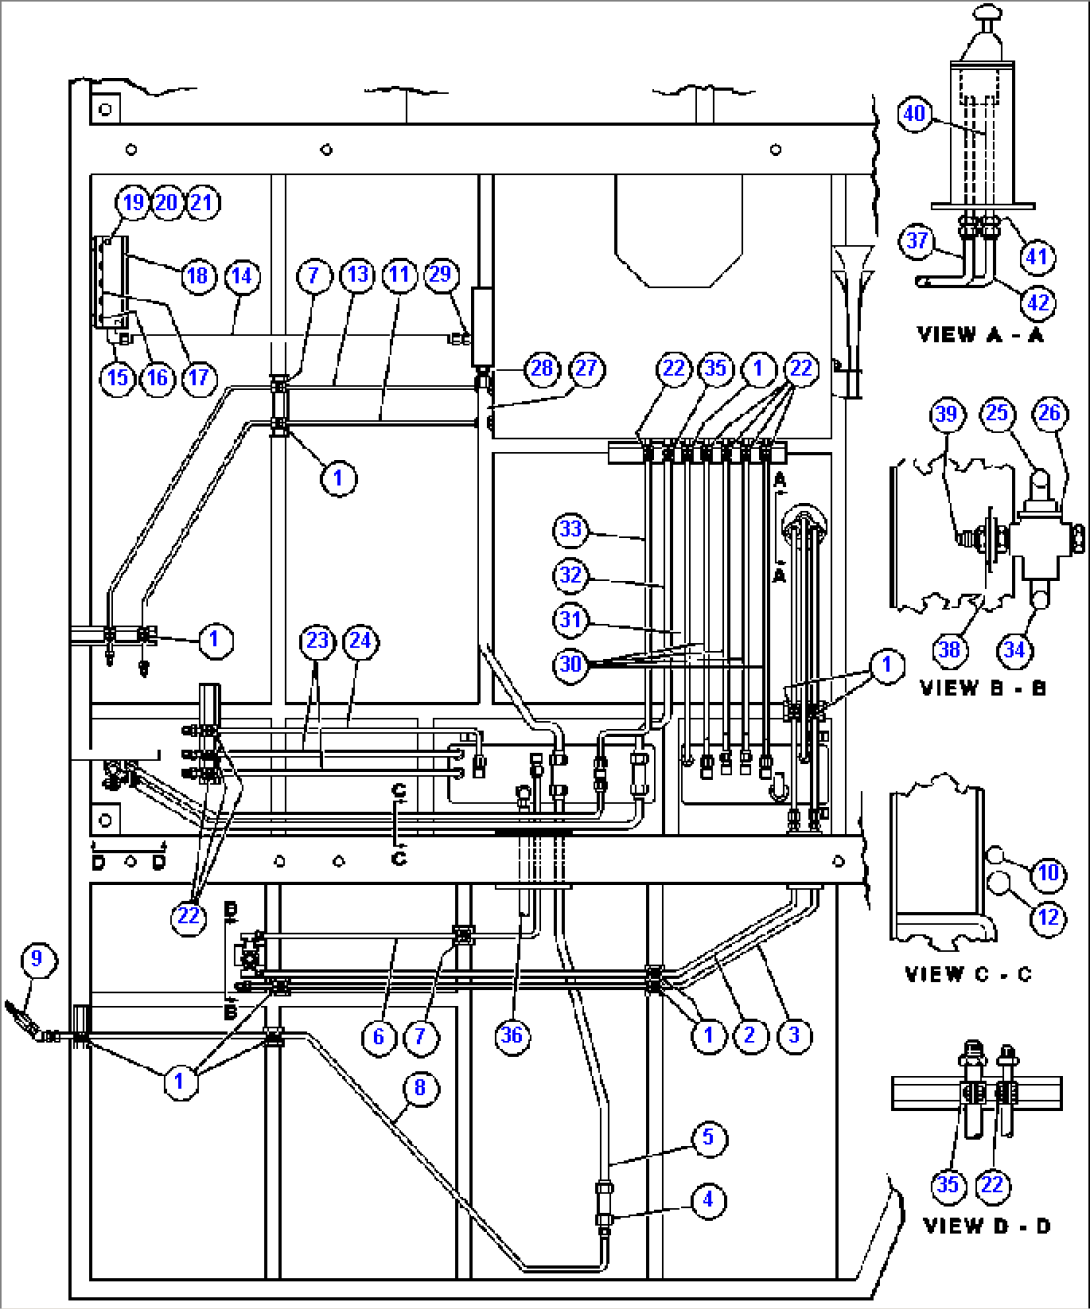 UNDER CAB PIPING